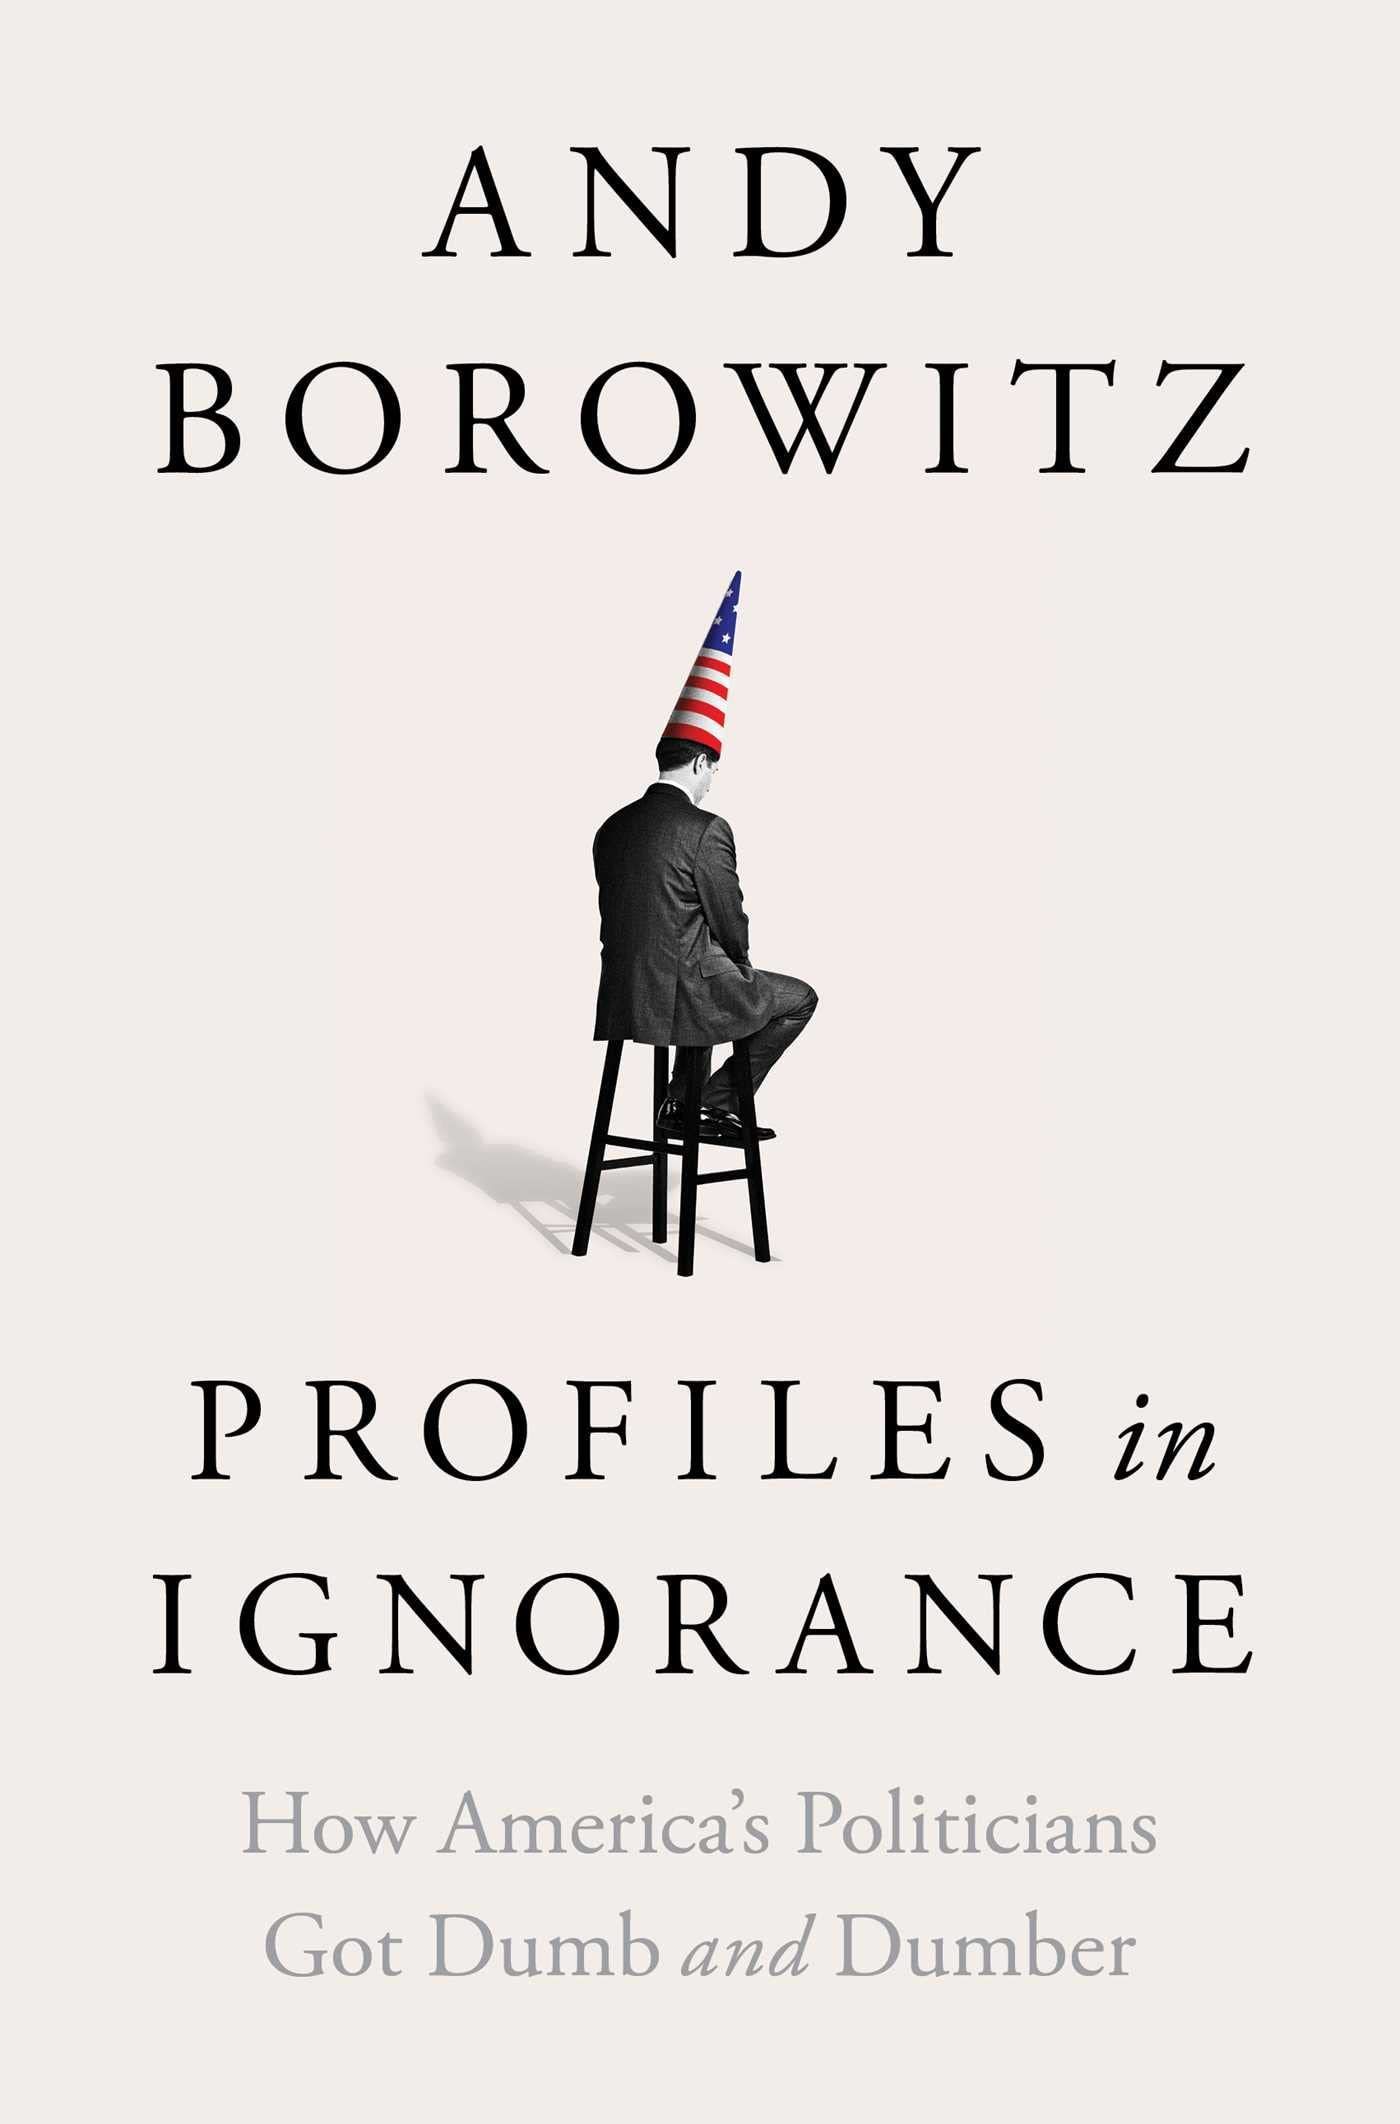 An American Tragicomedy: On Andy Borowitz’s “Profiles in Ignorance”